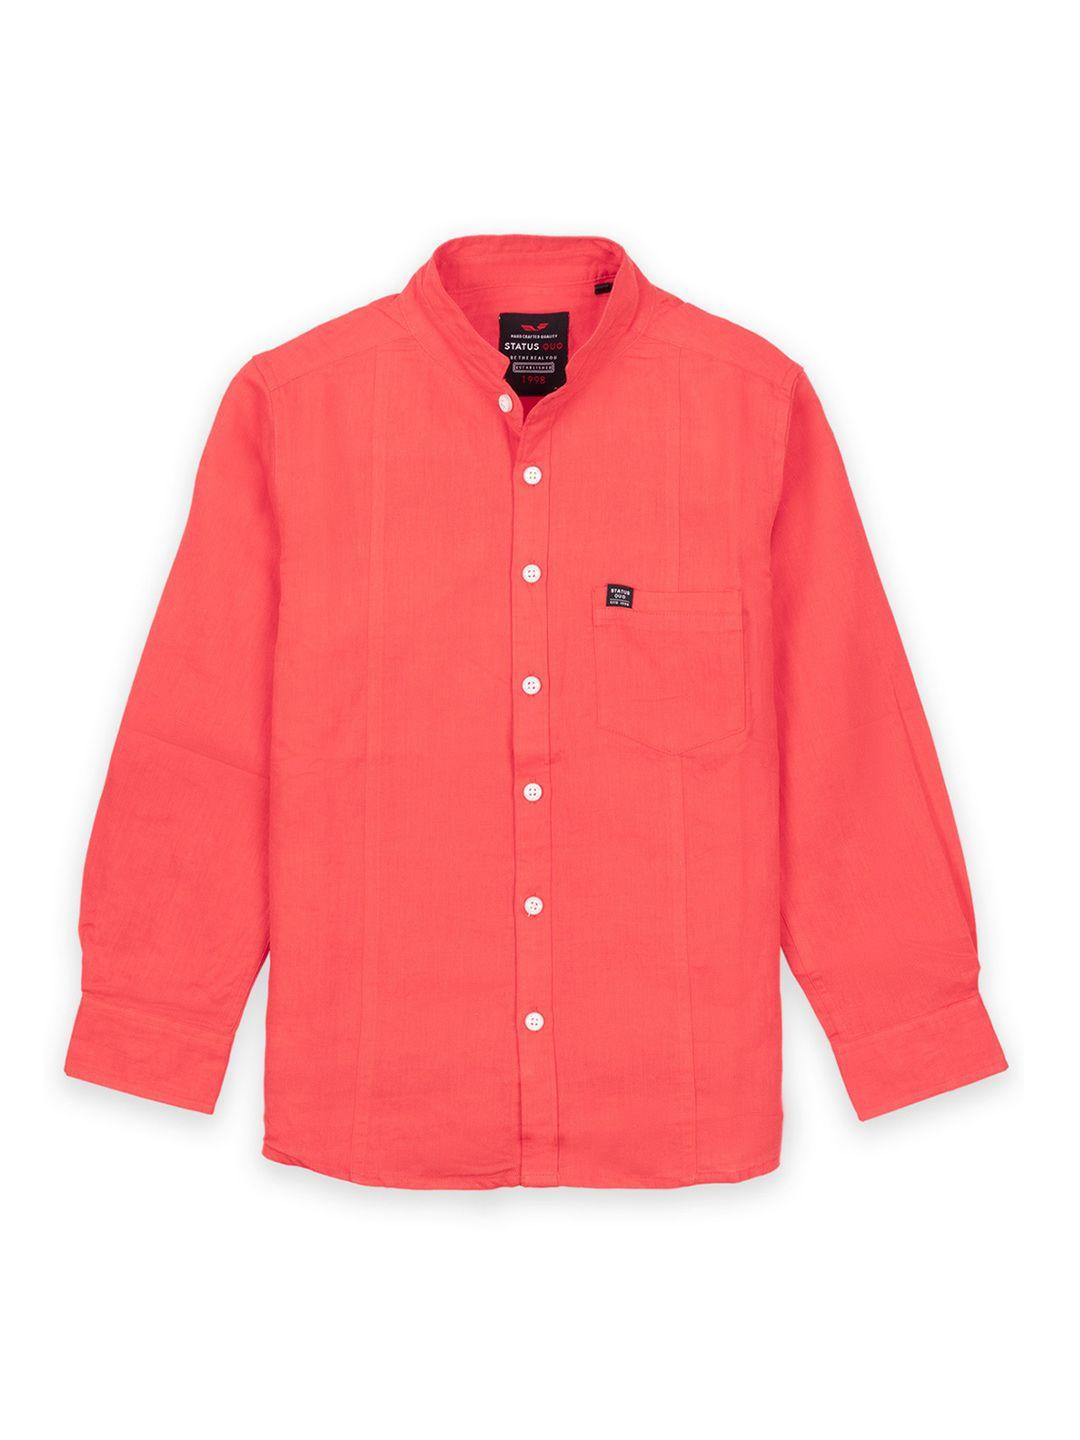 status quo boys coral casual shirt